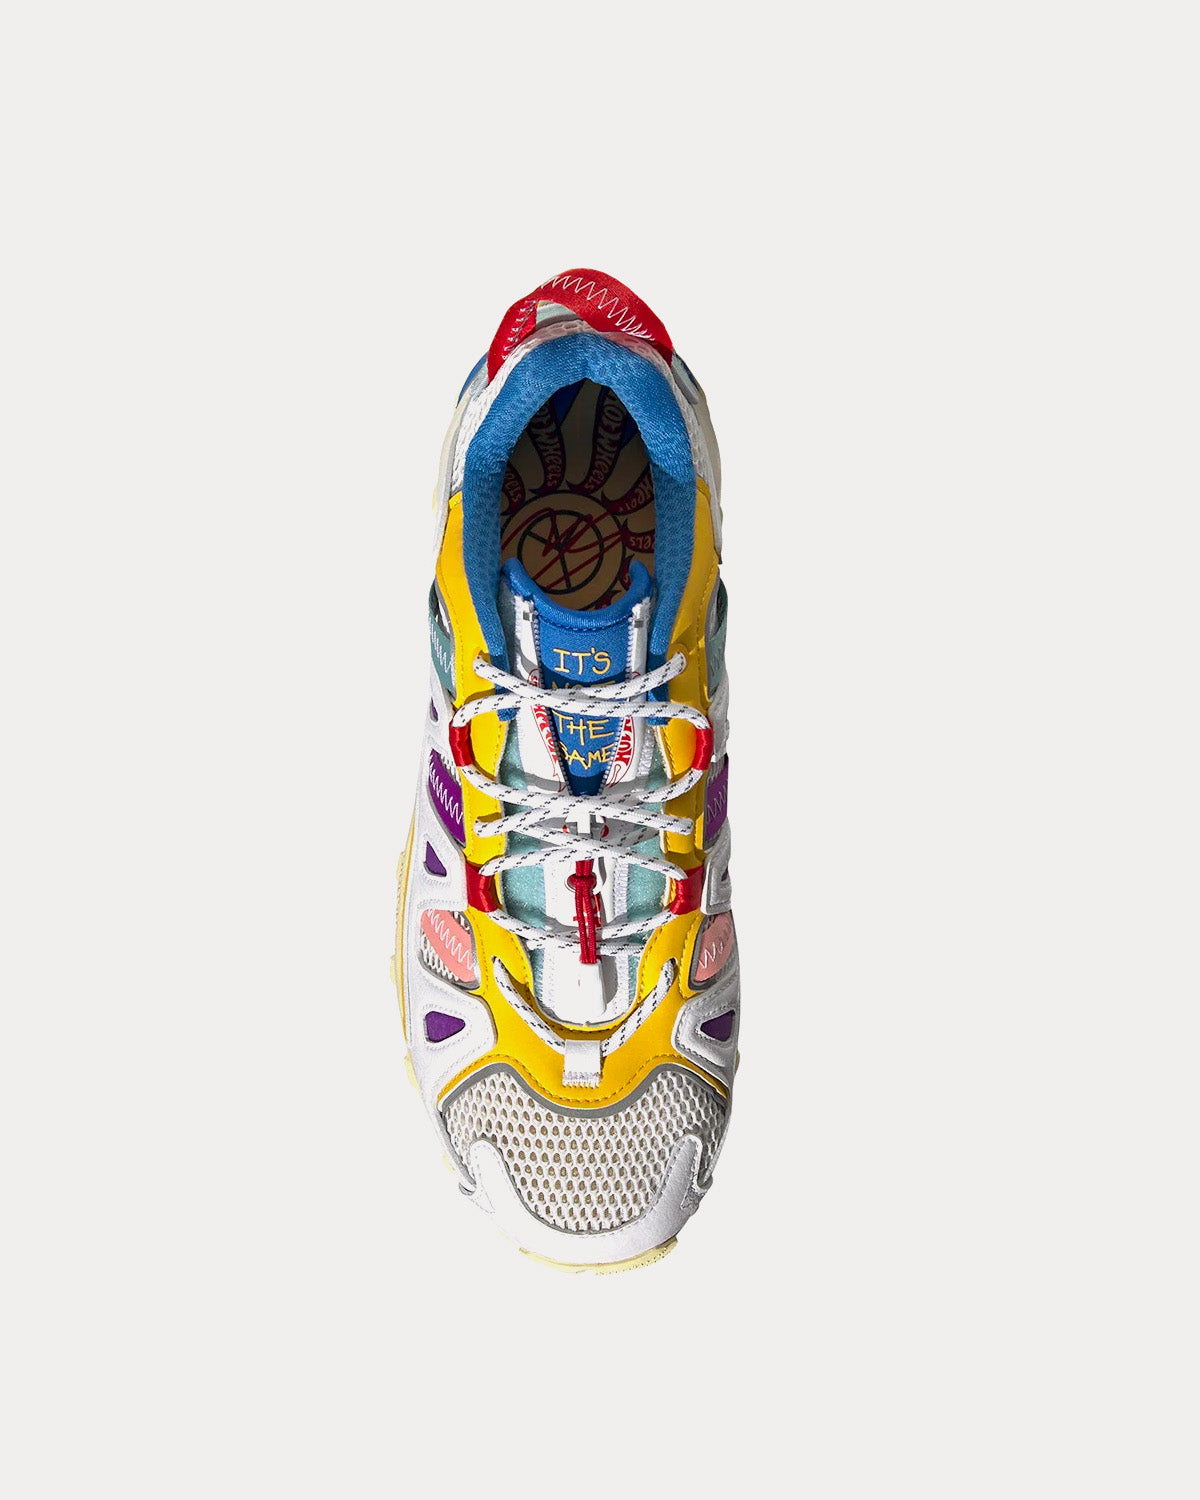 Adidas x Sean Wotherspoon - x Hot Wheels White / Bold Gold / Bluebird Low Top Sneakers